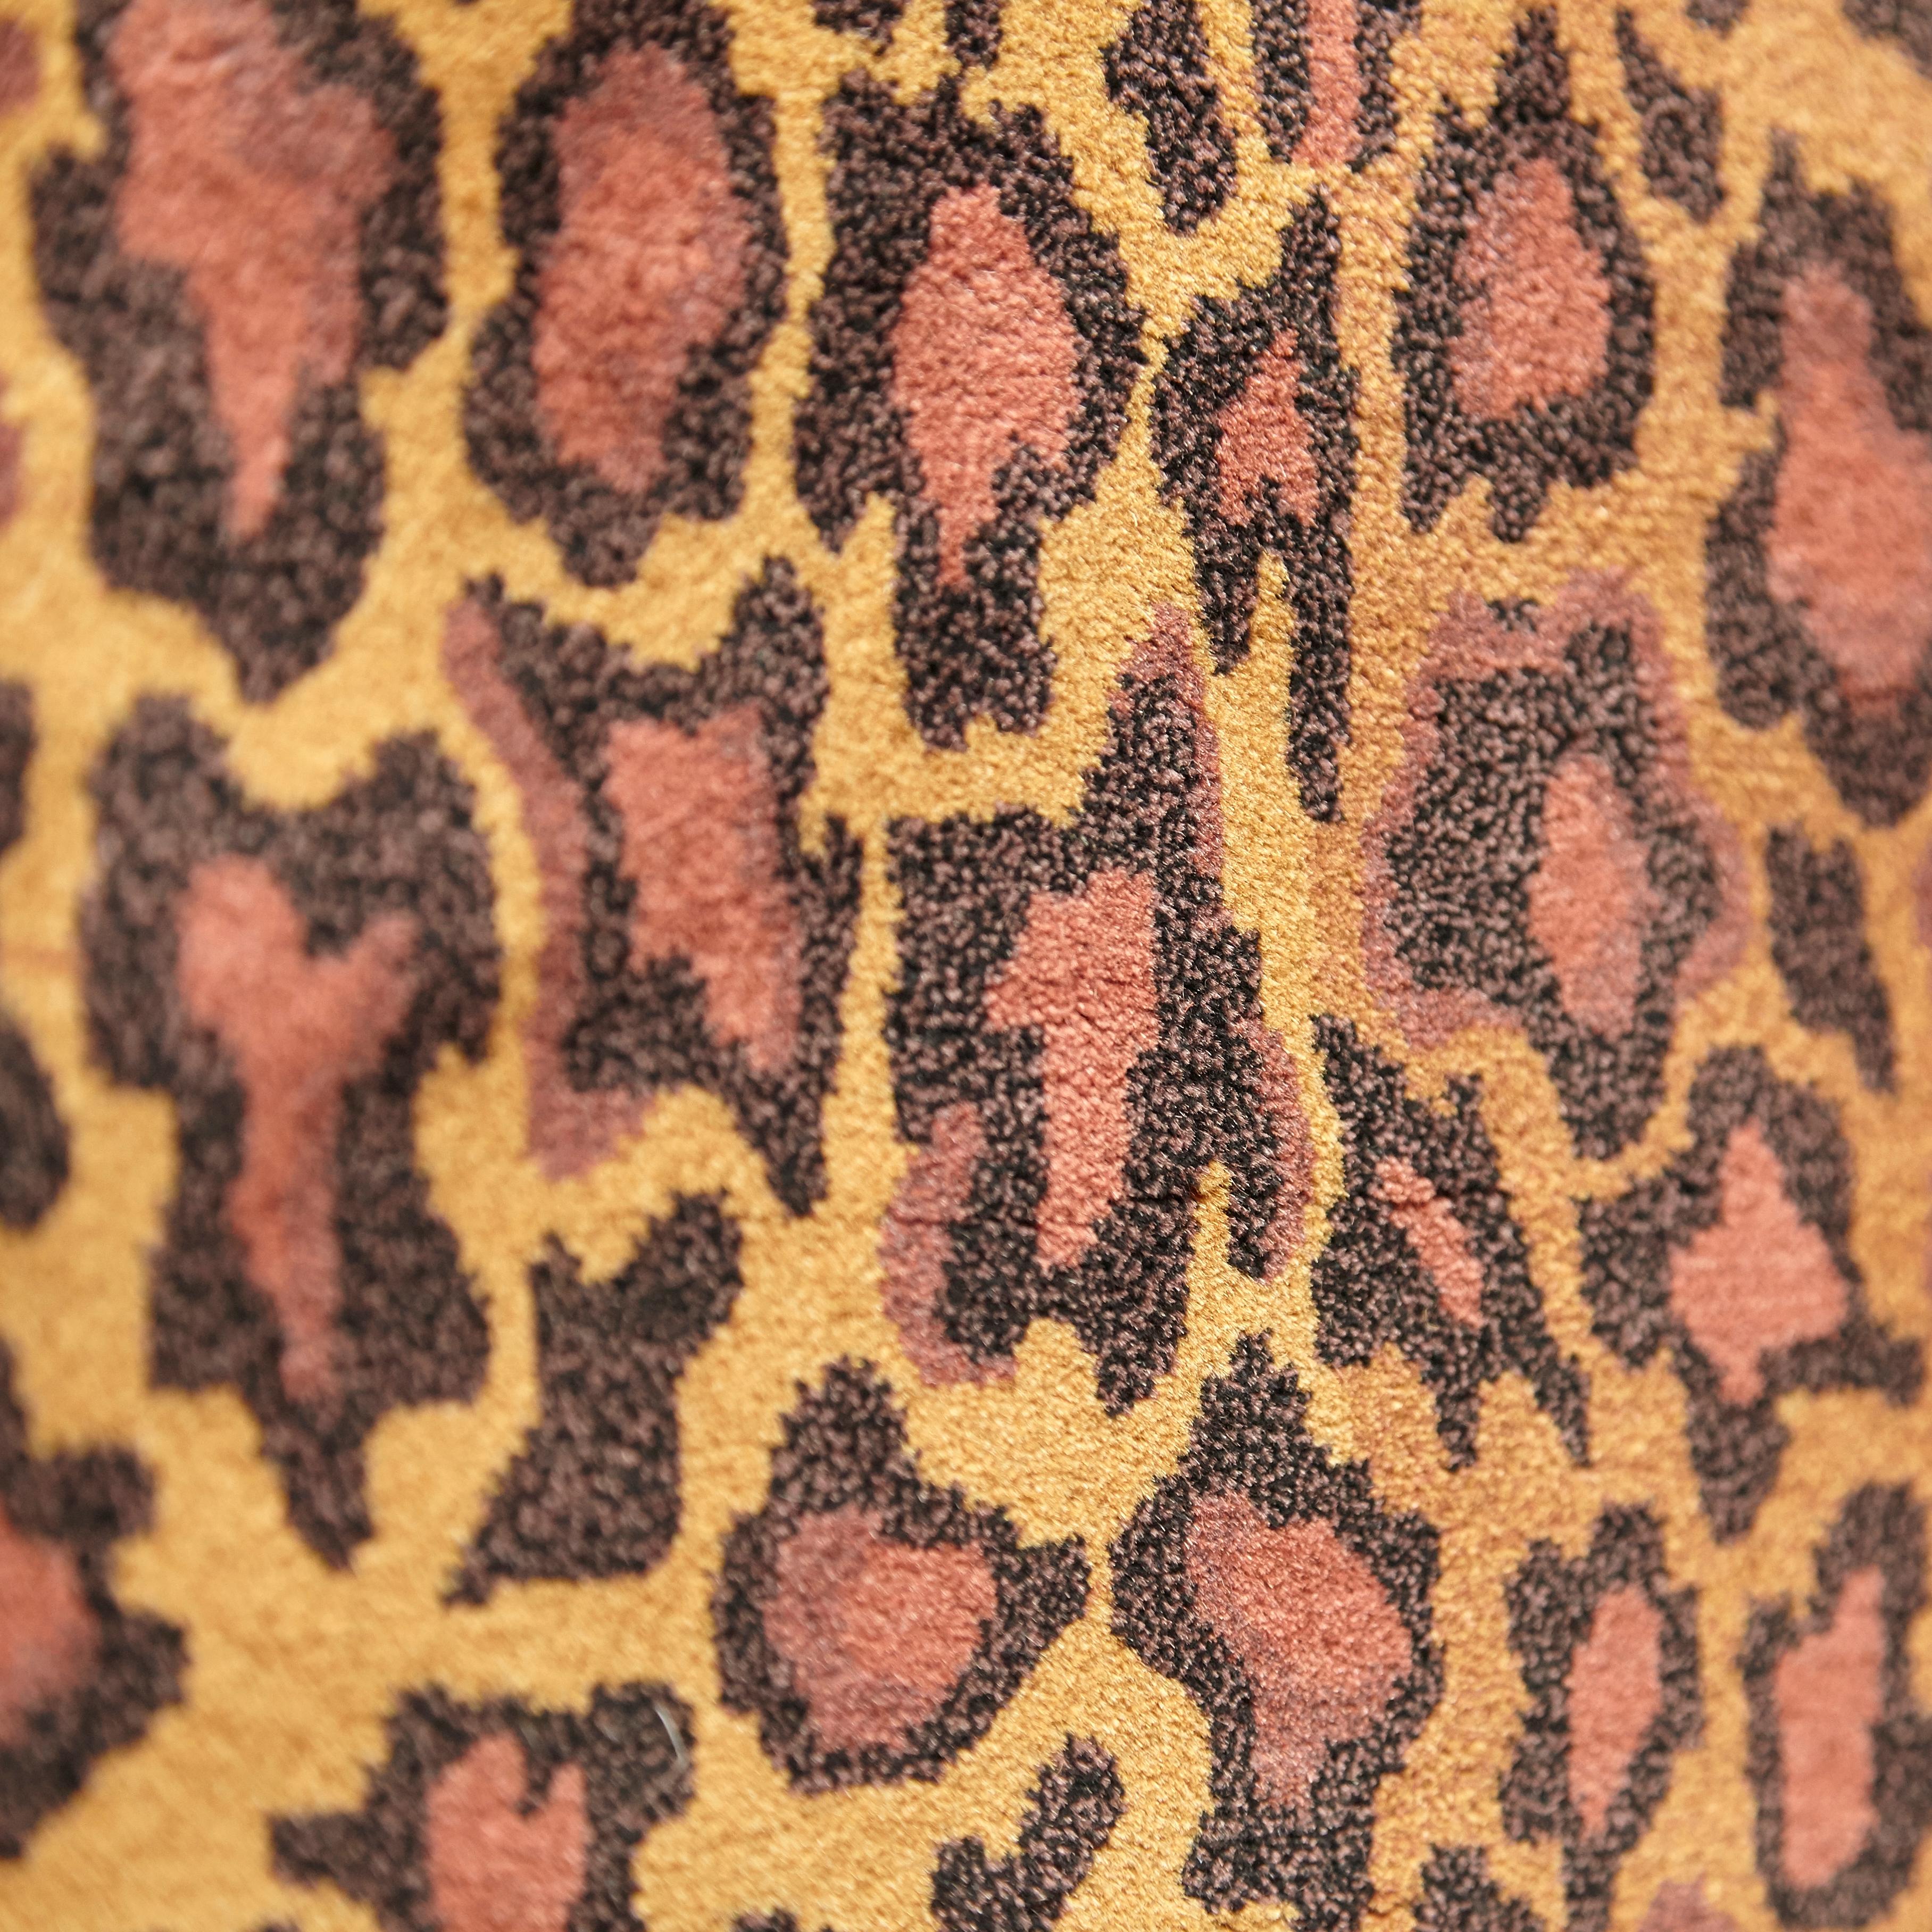 Late 20th Century Gianni Versace Collection Rug Wild Barocco, Gold Leopard Animal Print, 1980